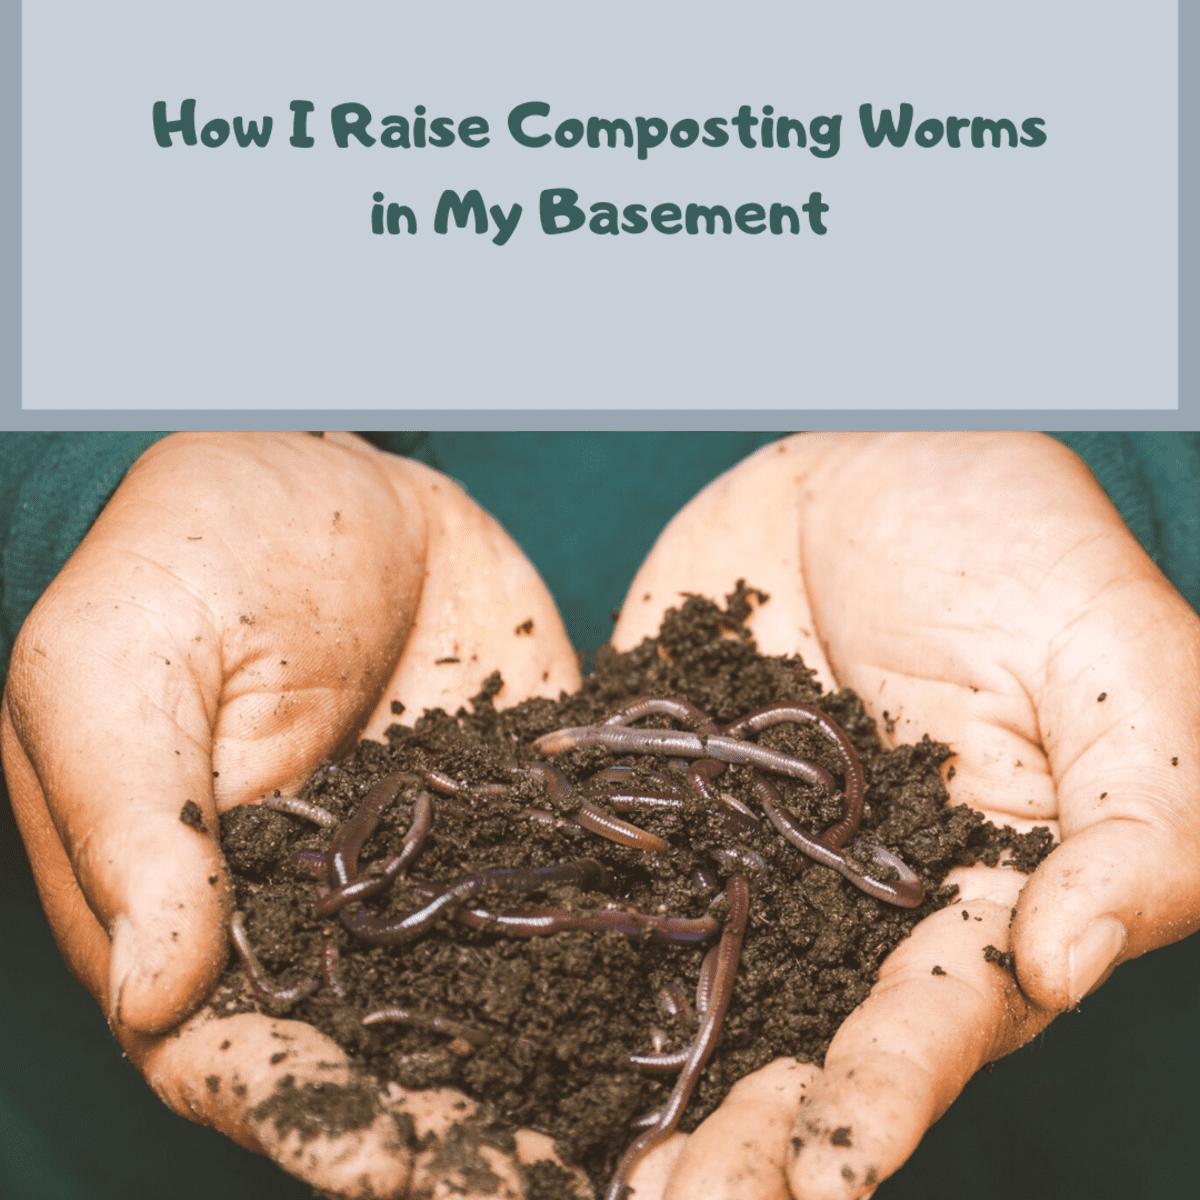 How I Raise Composting Worms in My Basement - Dengarden